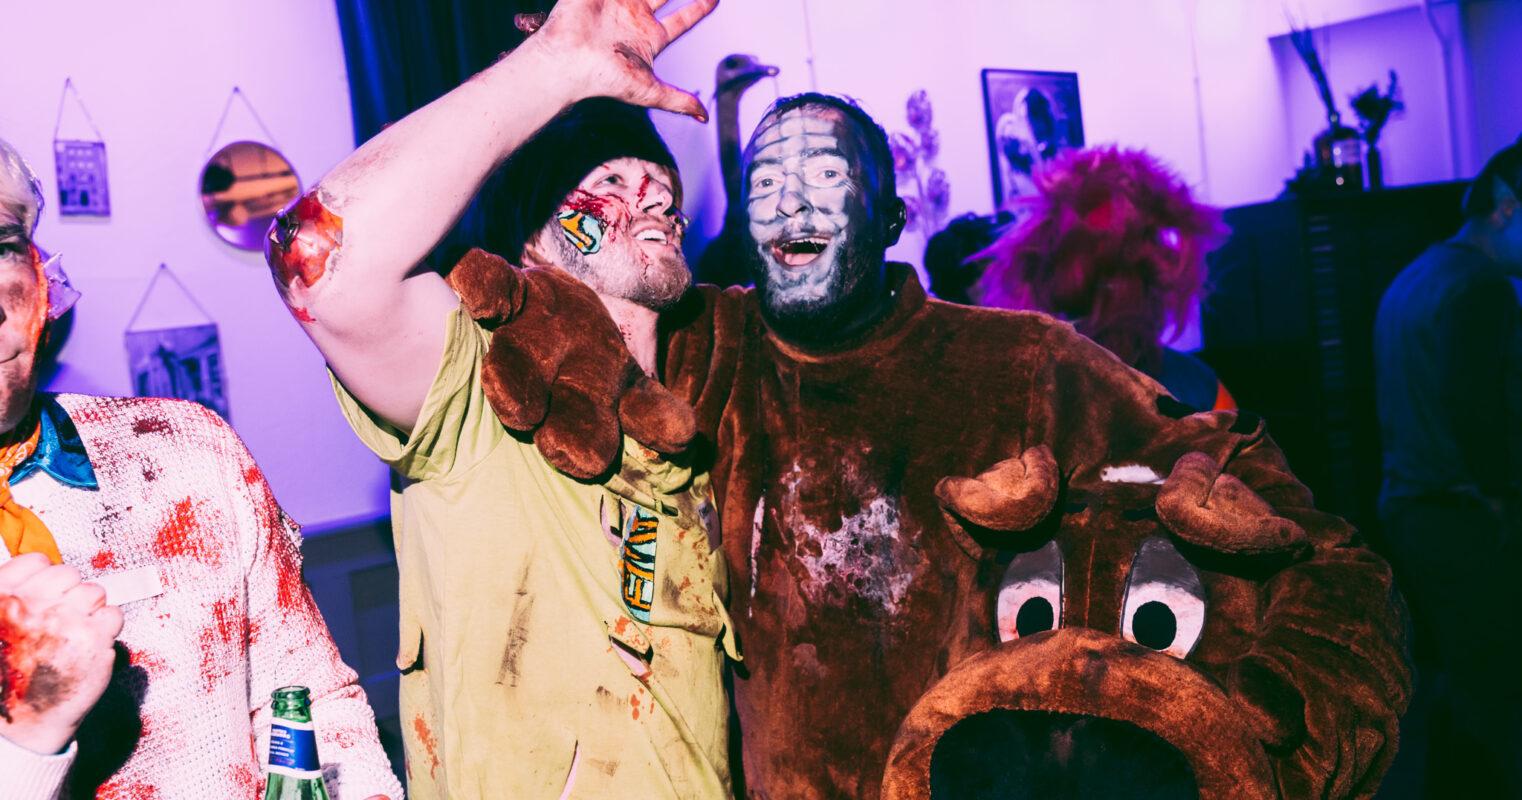 Two people in zombie and mascot costumes posing playfully, adding a comical touch to a gory theme.